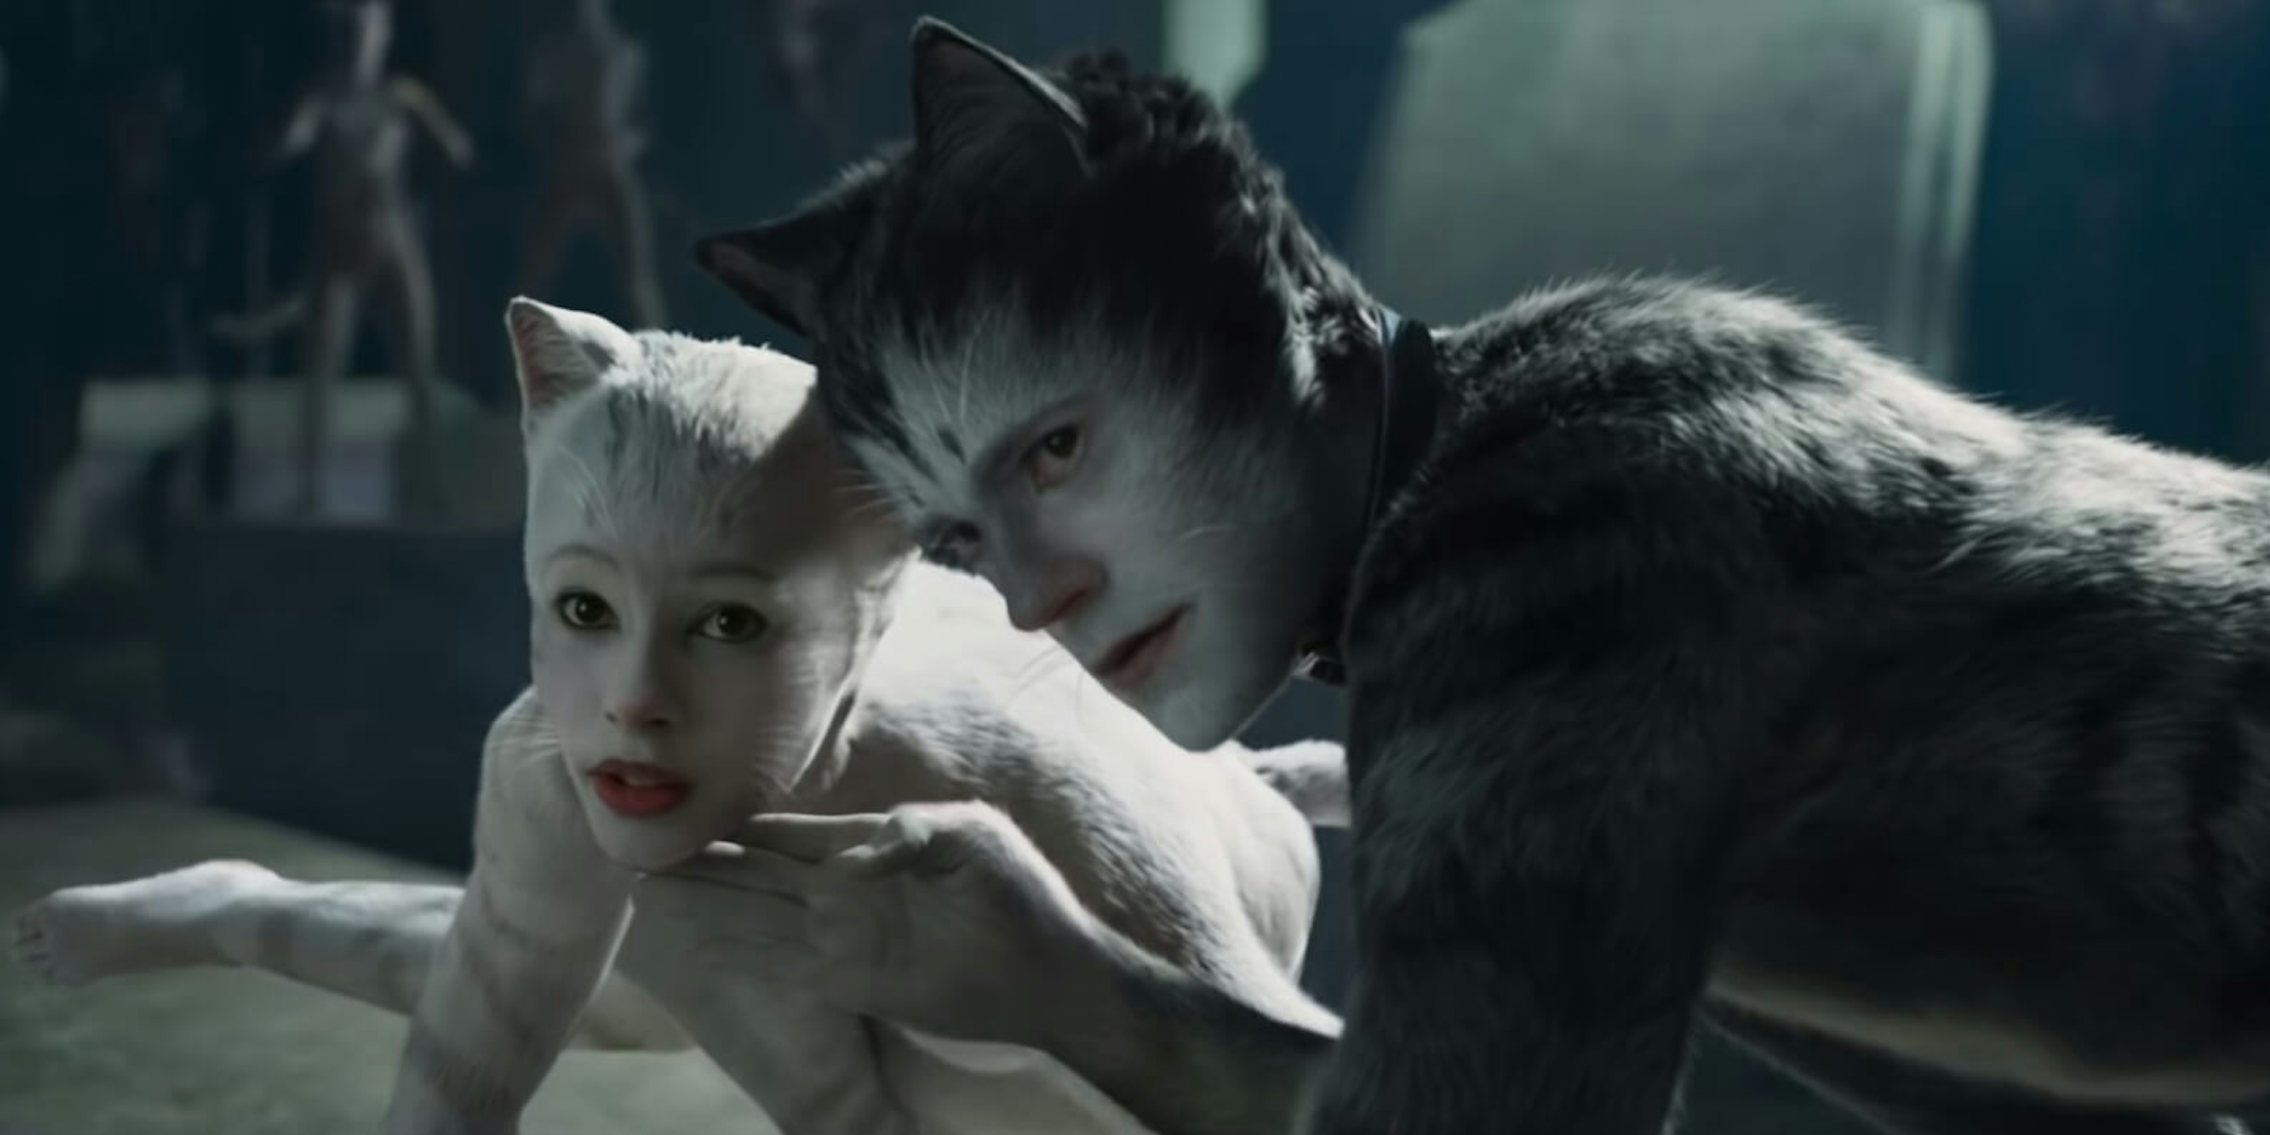 An image from the movie Cats